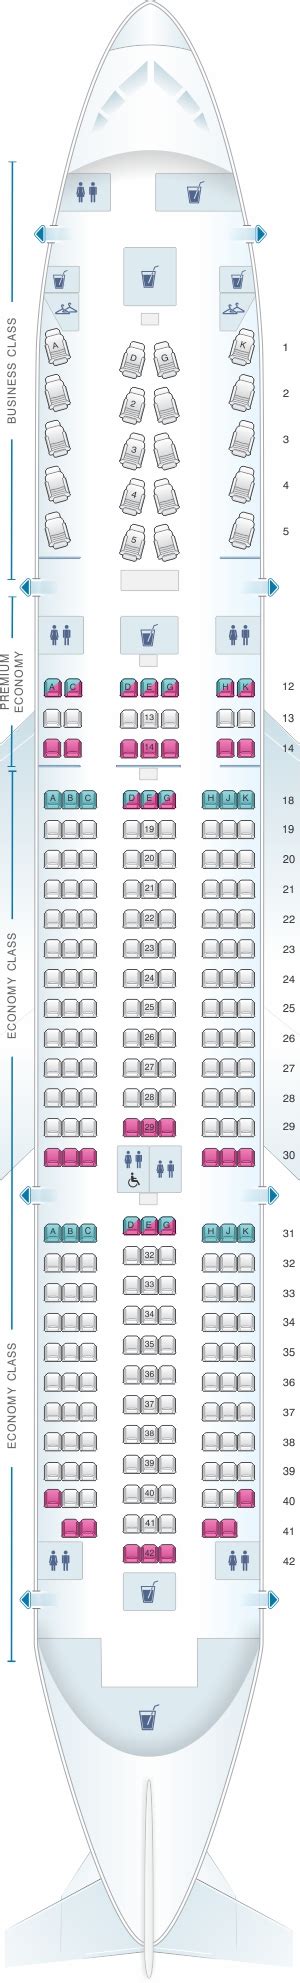 Boeing Dreamliner Seating Plan Air Canada Awesome Home